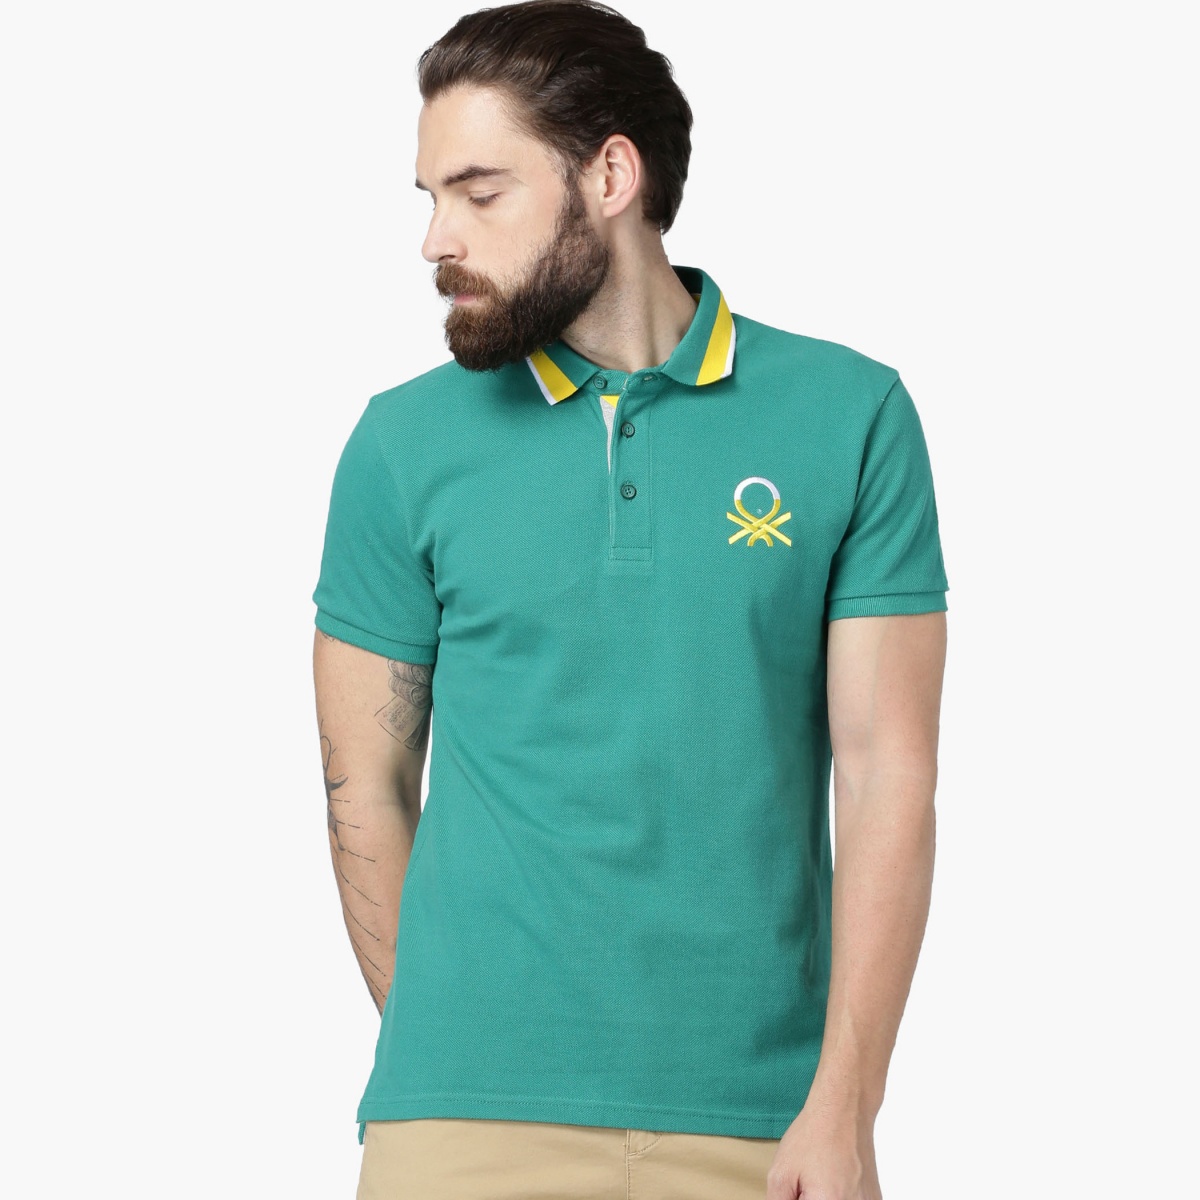 UNITED COLORS OF BENETTON Contrast Tipping Pique Knit Polo T-Shirt